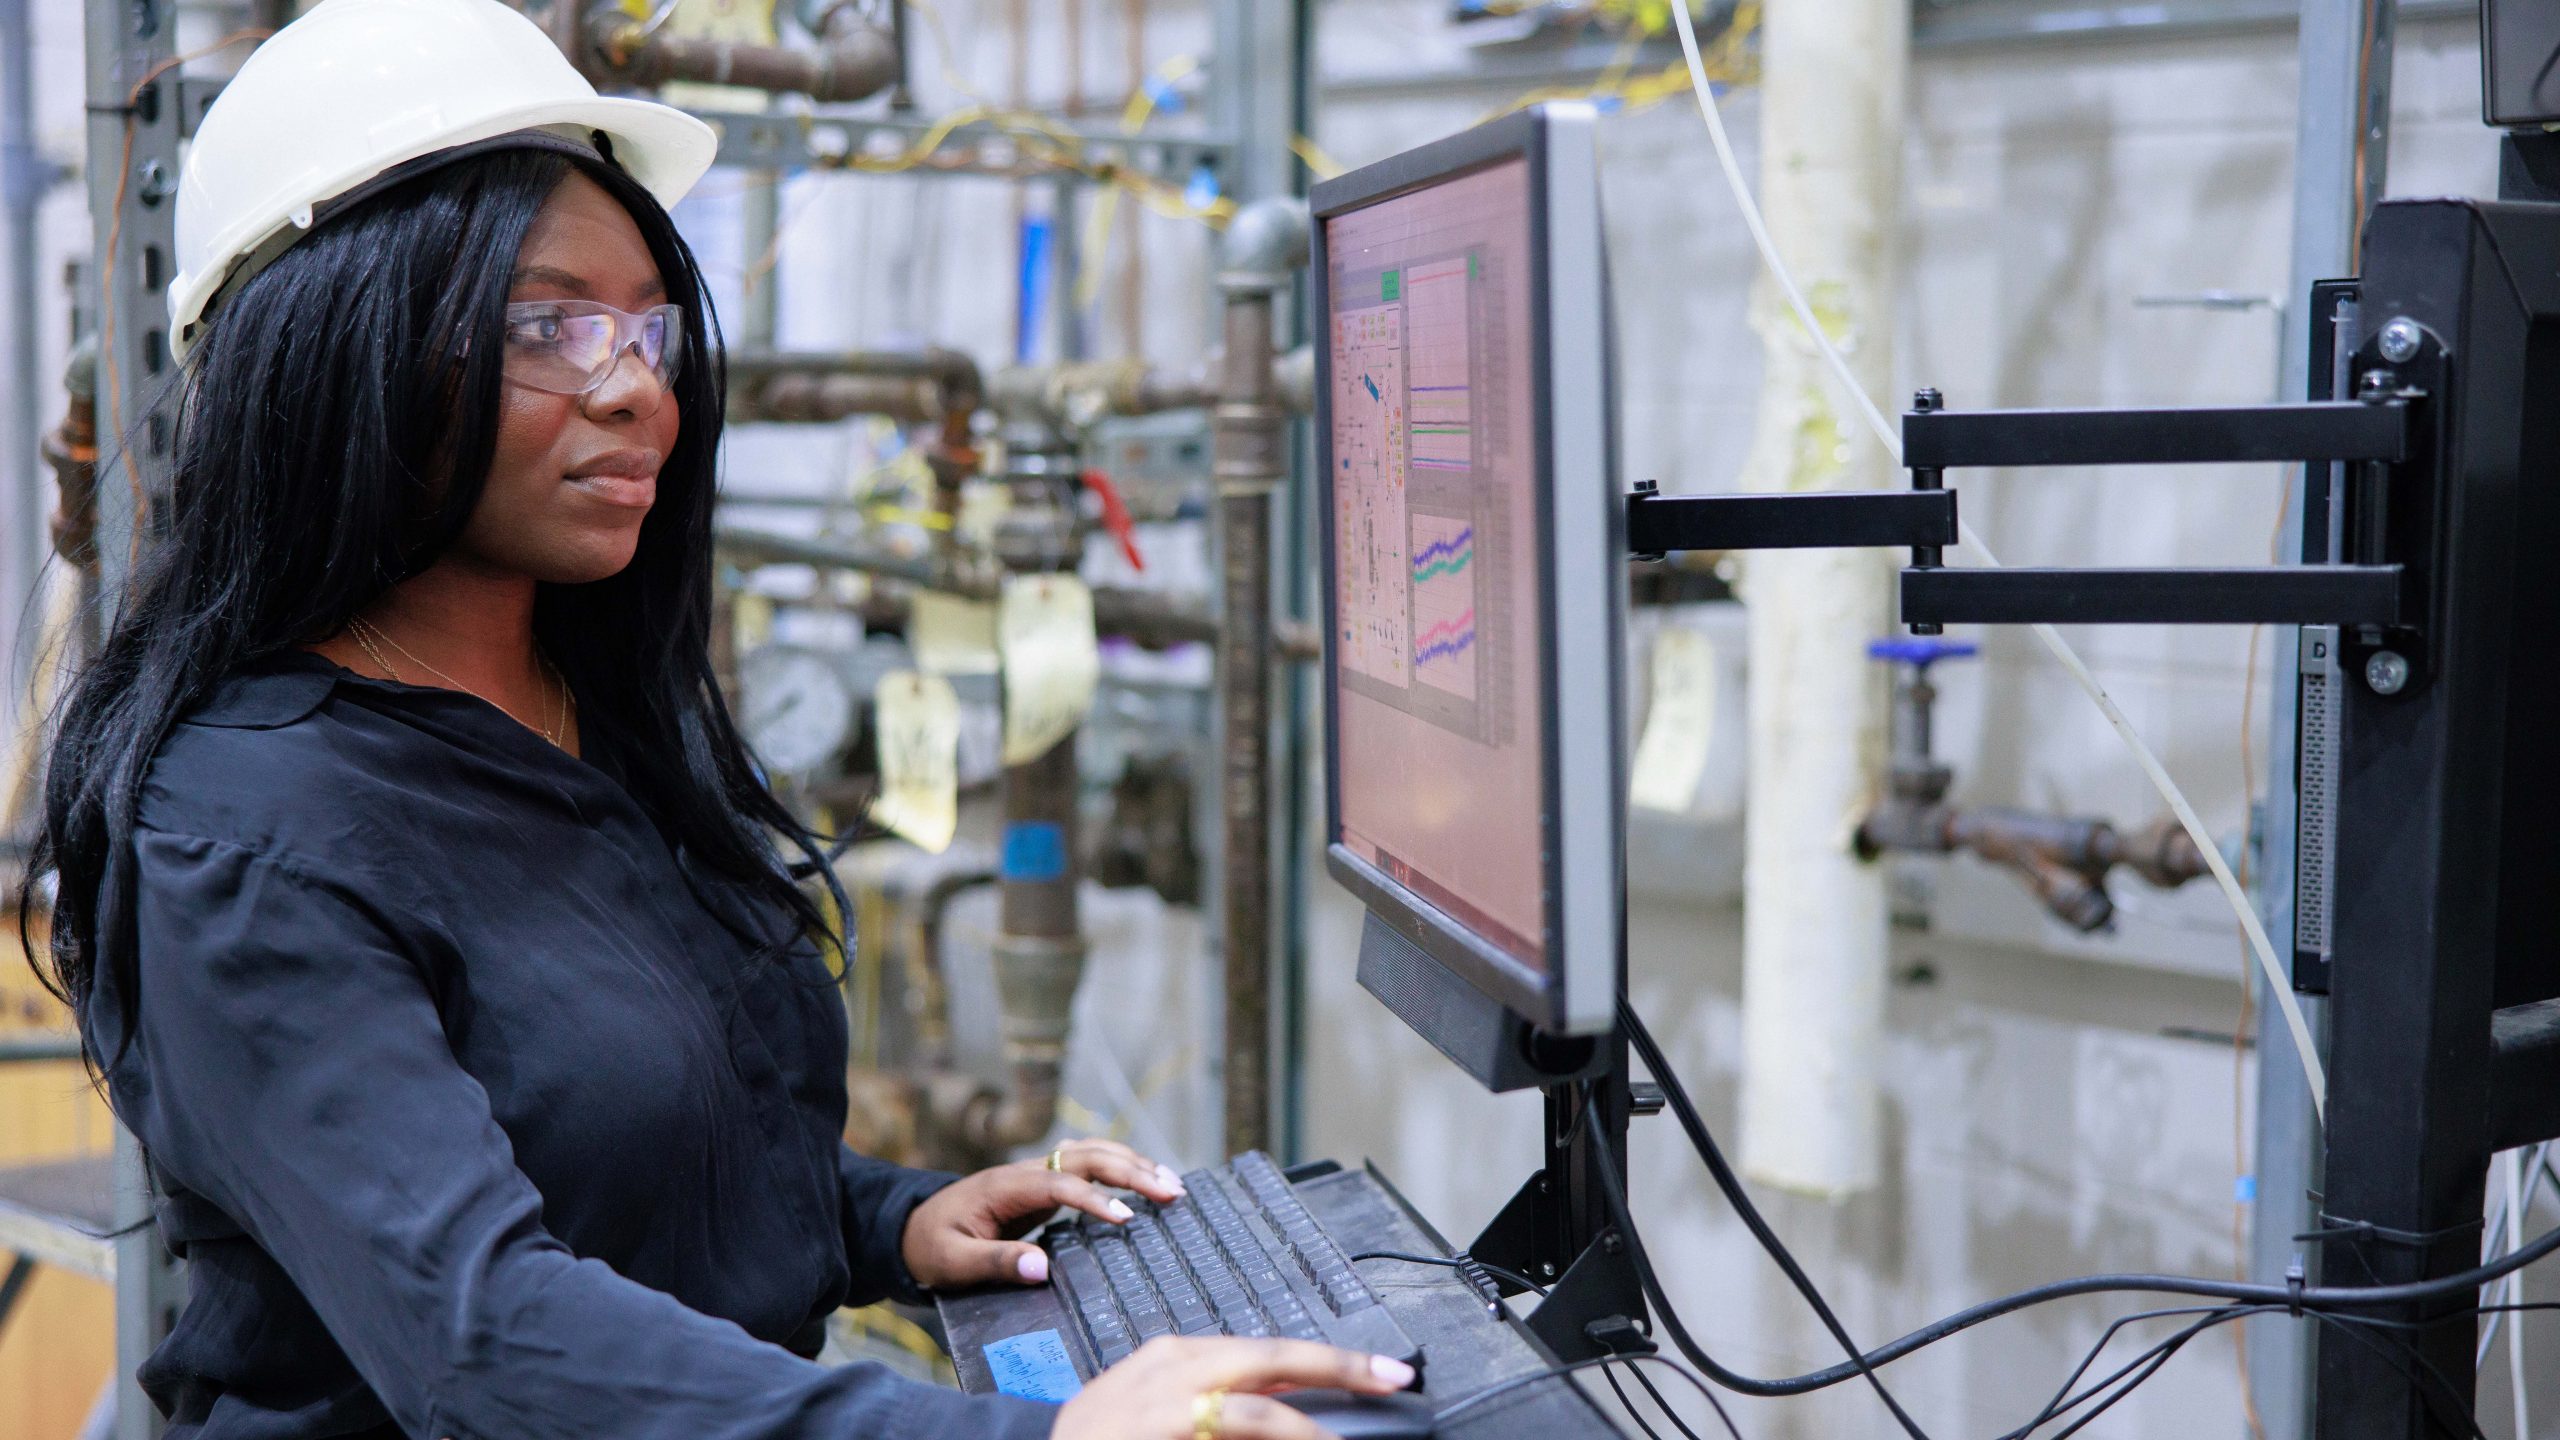 A black woman works at a computer in an engineering lab